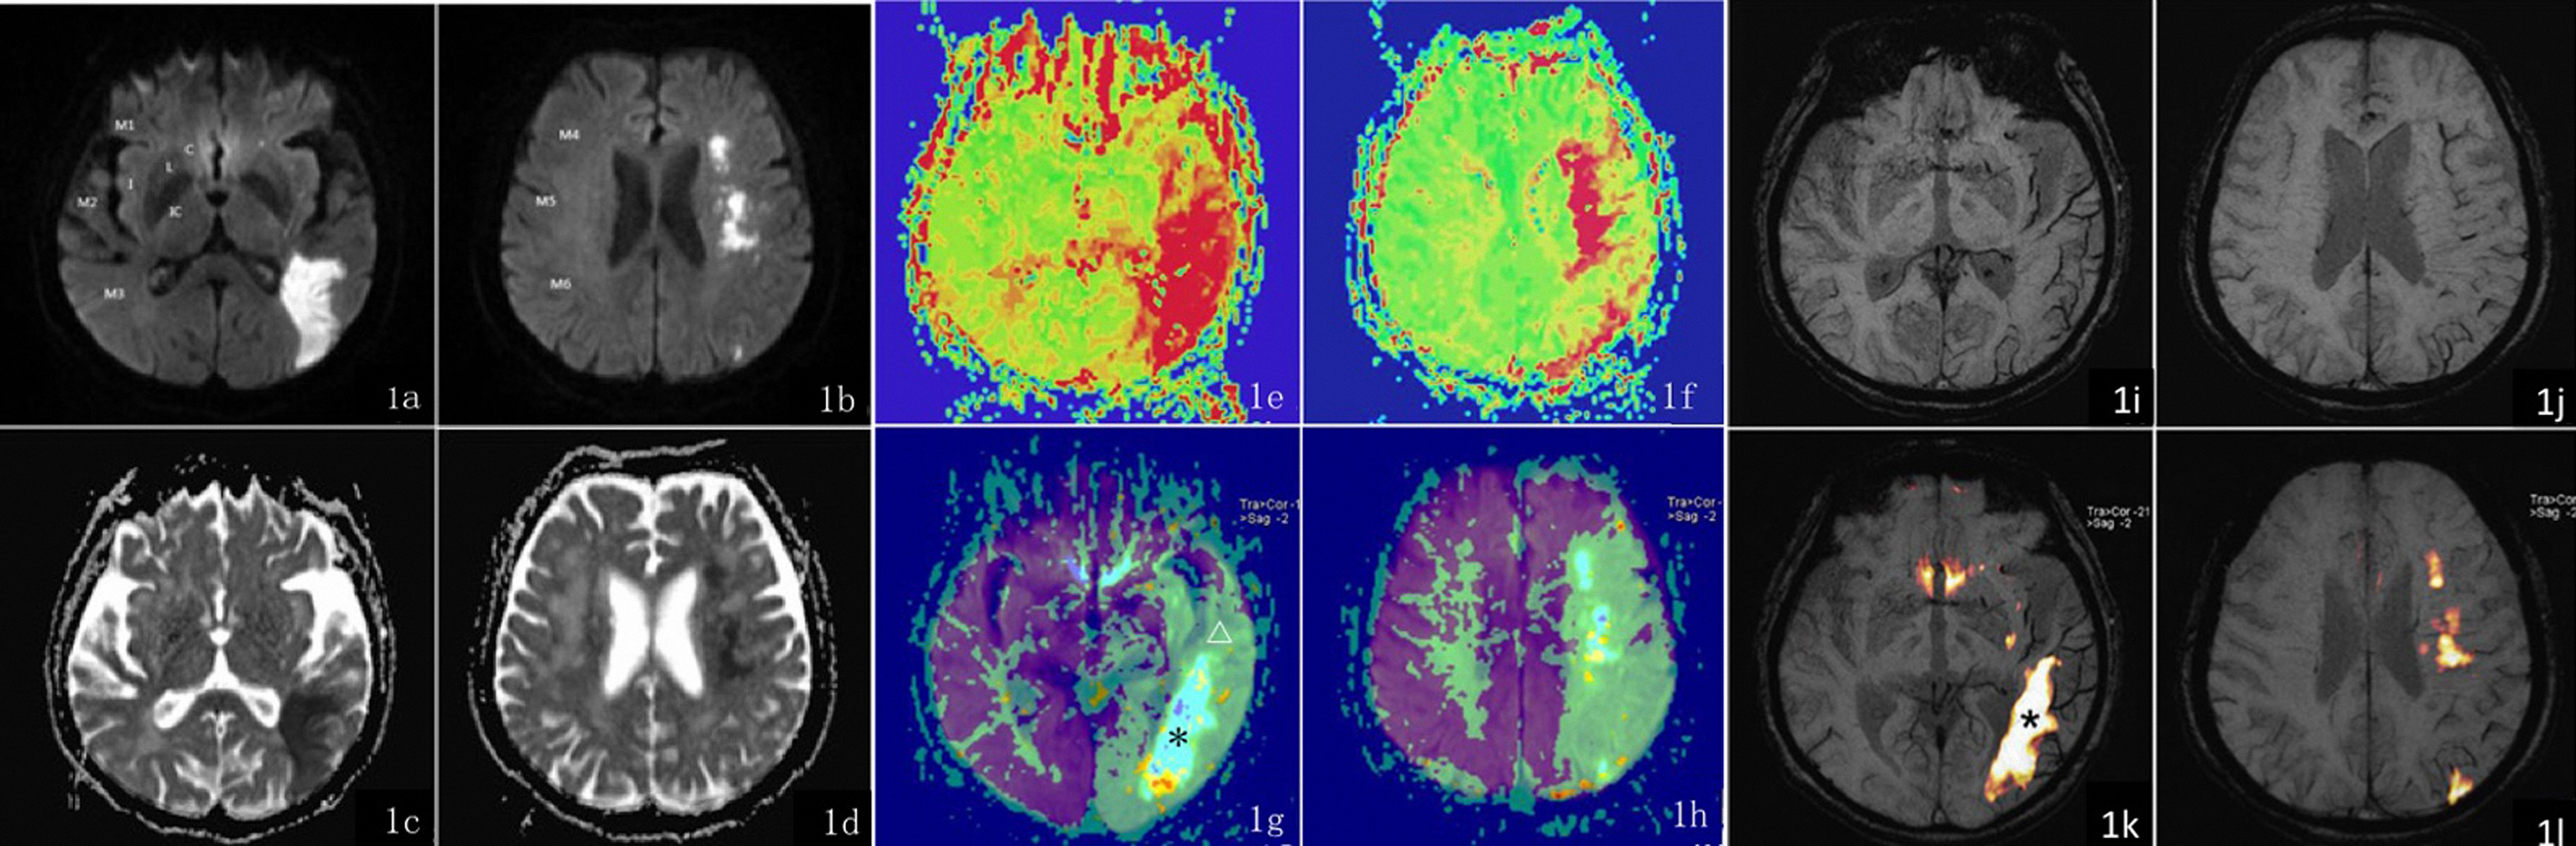 A female patient, 76 years old, complains of left-sided numbness on when she tries to stand quickly and aphasia over the past 15 hours. Figures 1a and 1c show a patchy hyperintensity on SWI in a single cortical area (Section M3) served by the left middle cerebral artery (area M3). The ADC image shows a reduced ADC value in the left occipital lobe. Figures 1b and 1d show a patchy hyperintensity on SWI in 3 areas served by the left middle cerebral artery (Sections M4-M6) and a decreased ADC signal: ASPECTS = 6 scores. Figures 1e and 1f present a perfusion image (MTT map) with the MTT extending into the left insula and all 6 areas served by the left middle cerebral artery (Sections M1-M6): ASPECTS = 3 scores. Figures 1g and 1h show superimposed DWI and MTT images. Δ indicates an area with an abnormal perfusion signal area; * indicates an area of hyperintensity detected by DWI. The area of abnormal perfusion is clearly larger than the abnormal DWI area in the superposed image. Figures 1i and 1j show a greater number of enlarged small veins in the left insula and in all 6 cortical areas served by the left middle cerebral artery (Sections M1-M6) than are seen on the other side in the SWI minIP image: ASPECTS = 3 scores. Figures 1k and 1l show superposed DWI and minIP images. * indicates an area of DWI-detected hyperintensity. The area containing an increased number of small veins is larger on SWI compared with the abnormal area shown on the DWI. Key: C, caudate nucleus; L, lenticular nucleus; IC, internal capsule; middle cerebral artery cortical areas (Sections M1-M6); I, insula.